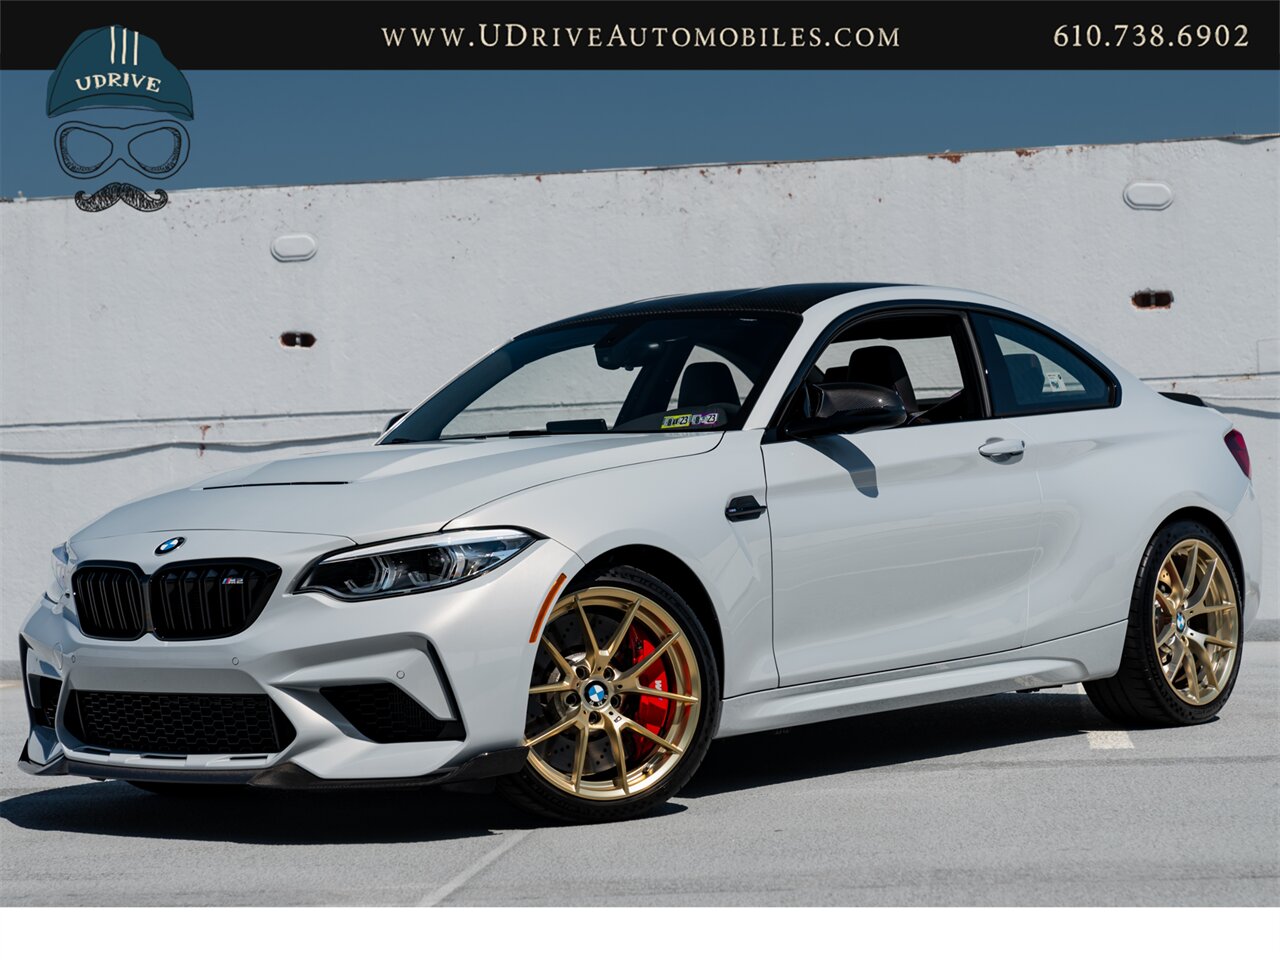 2020 BMW M2 CS  M2 CS 6 Speed Manual 2k Miles Full Body PPF Factory Warranty until 2025 - Photo 1 - West Chester, PA 19382